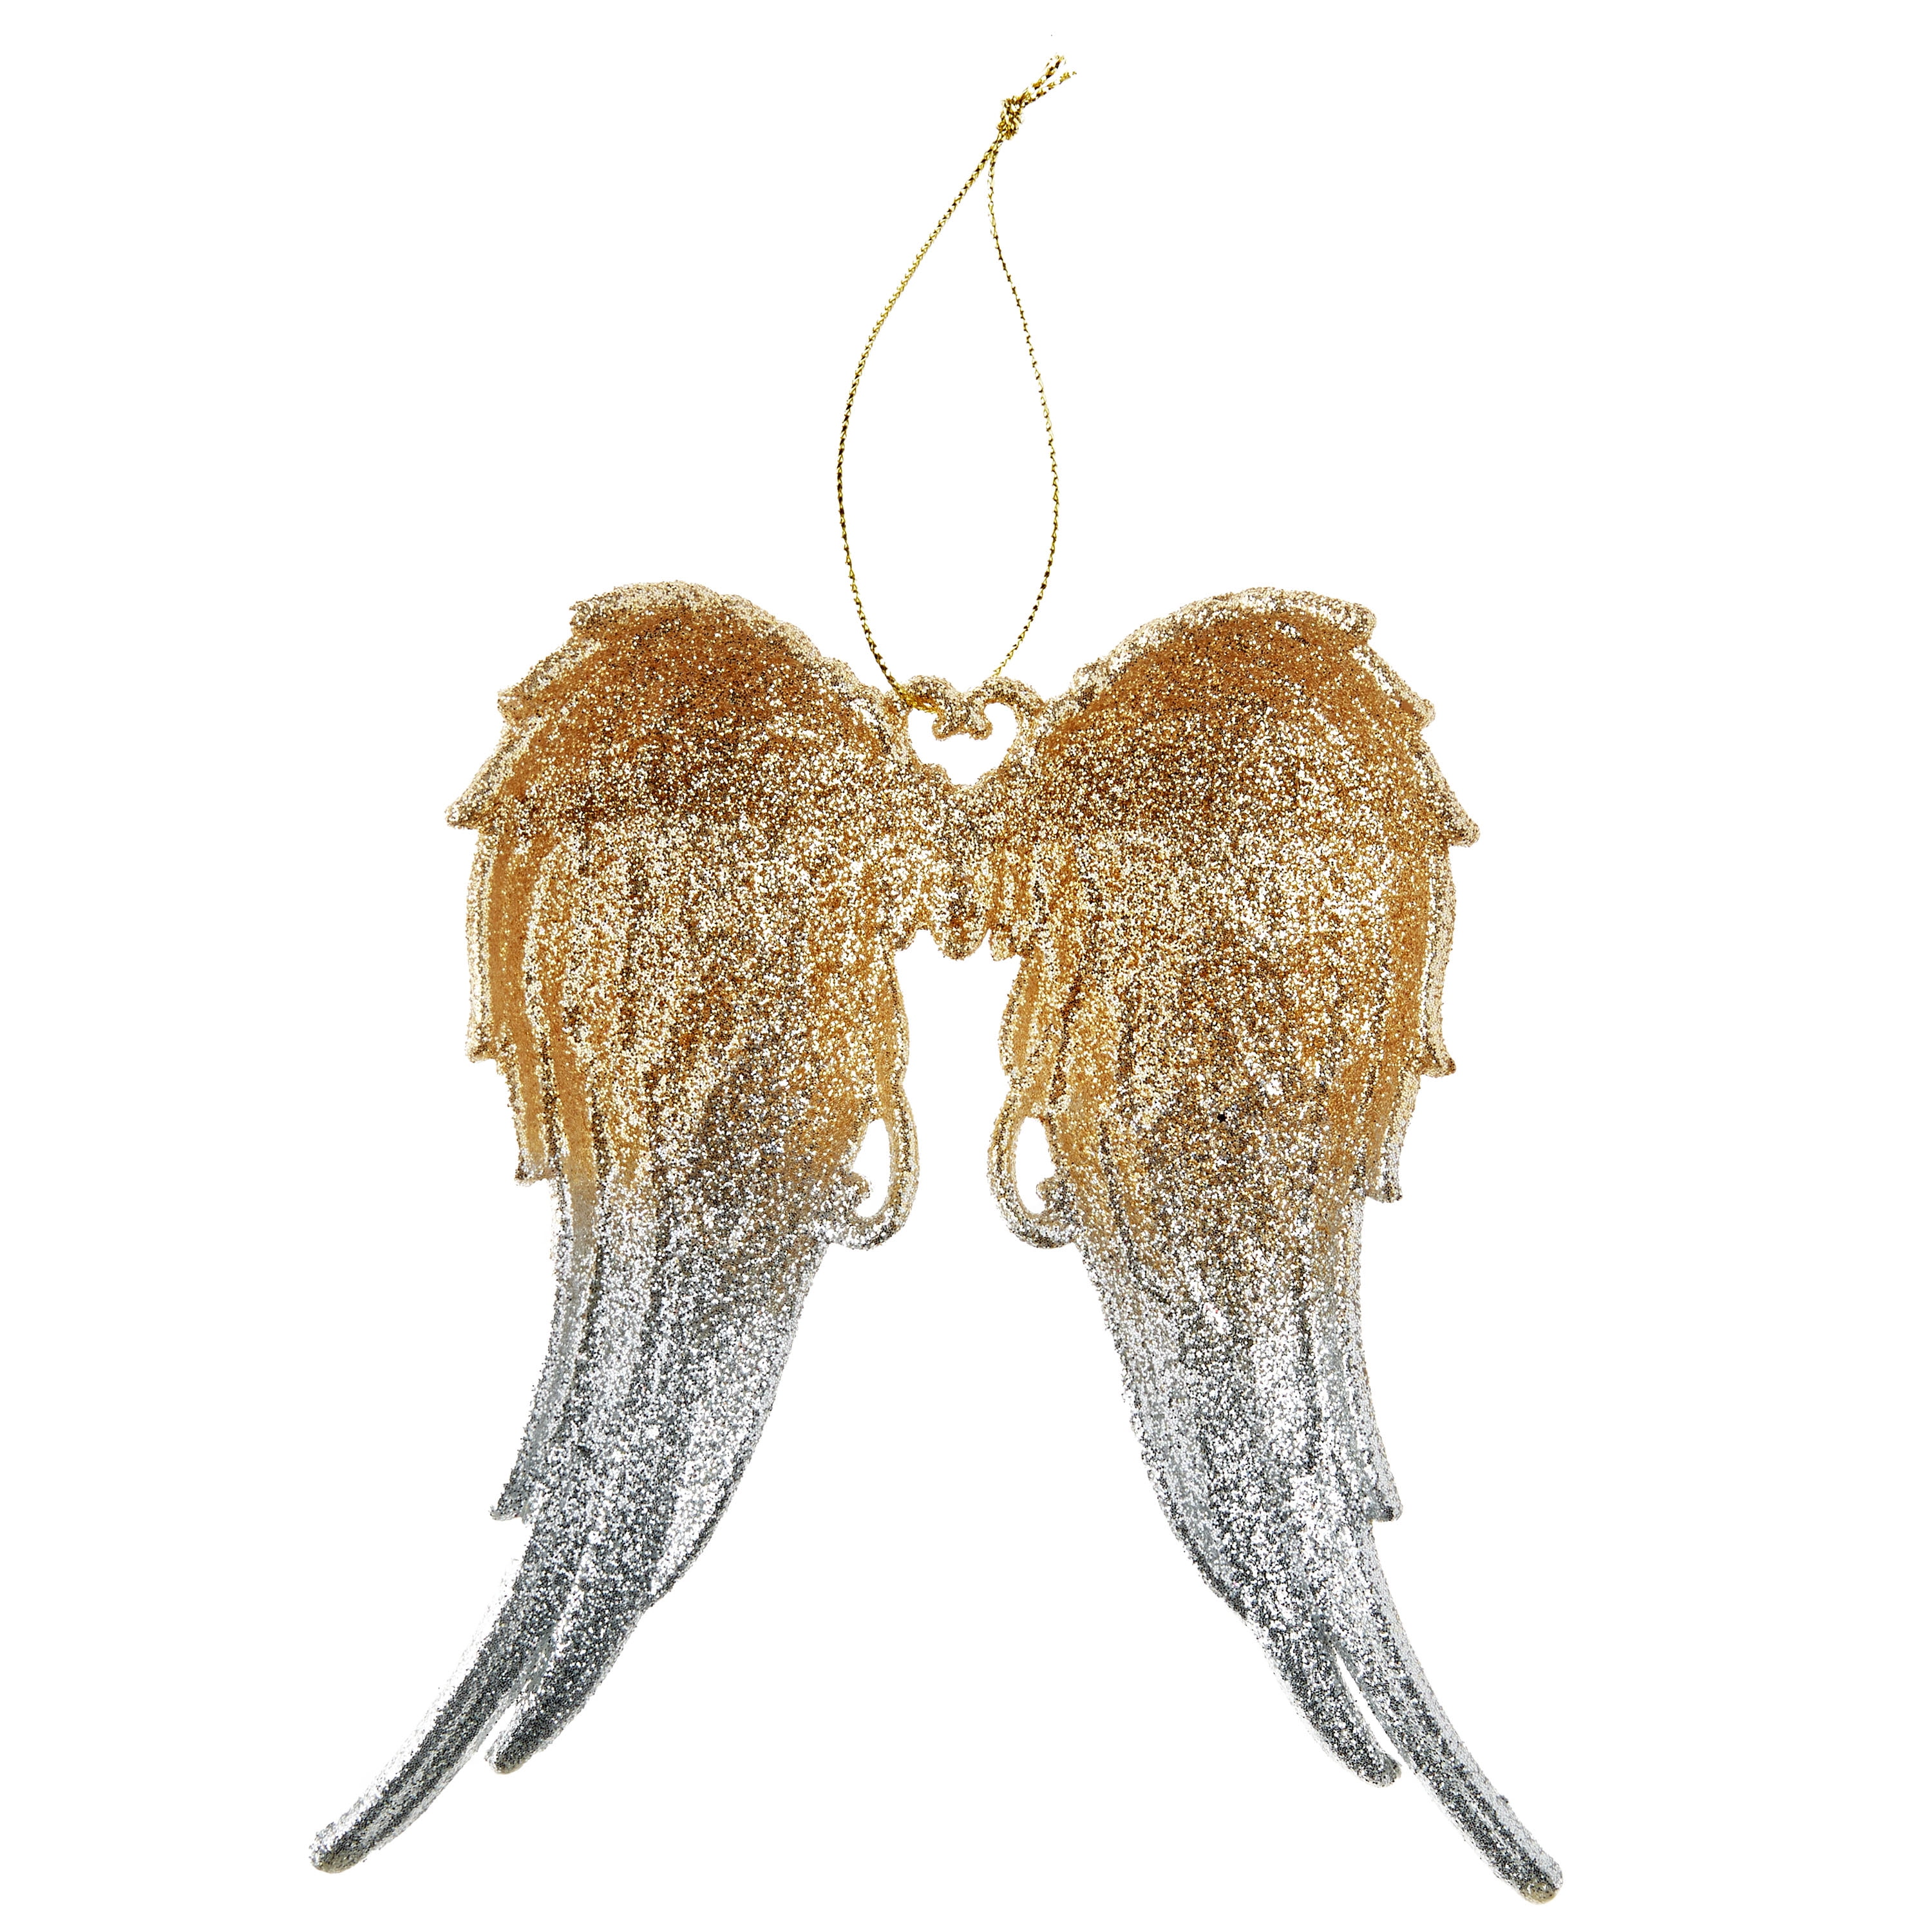 GOLD 6'' LONG BE ANGEL WINGS CHRISTMAS ORNAMENT CHRISTMAS ANGEL WINGS ORNAMENT 